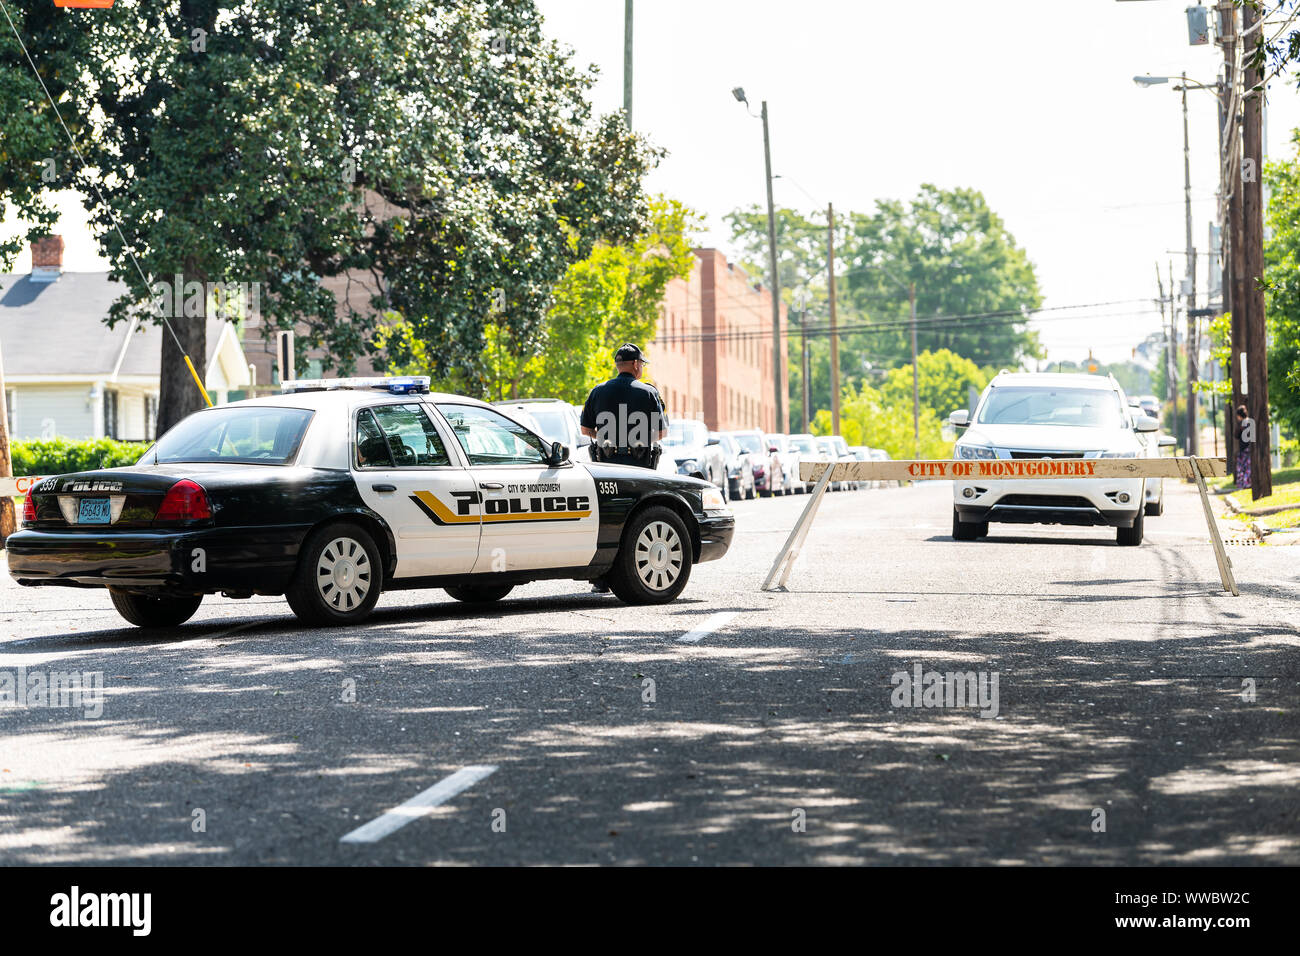 Montgomery, USA - April 21, 2018: Alabama city police officer or policeman car on street with sign on sidewalk with blocked road block or roadblock Stock Photo